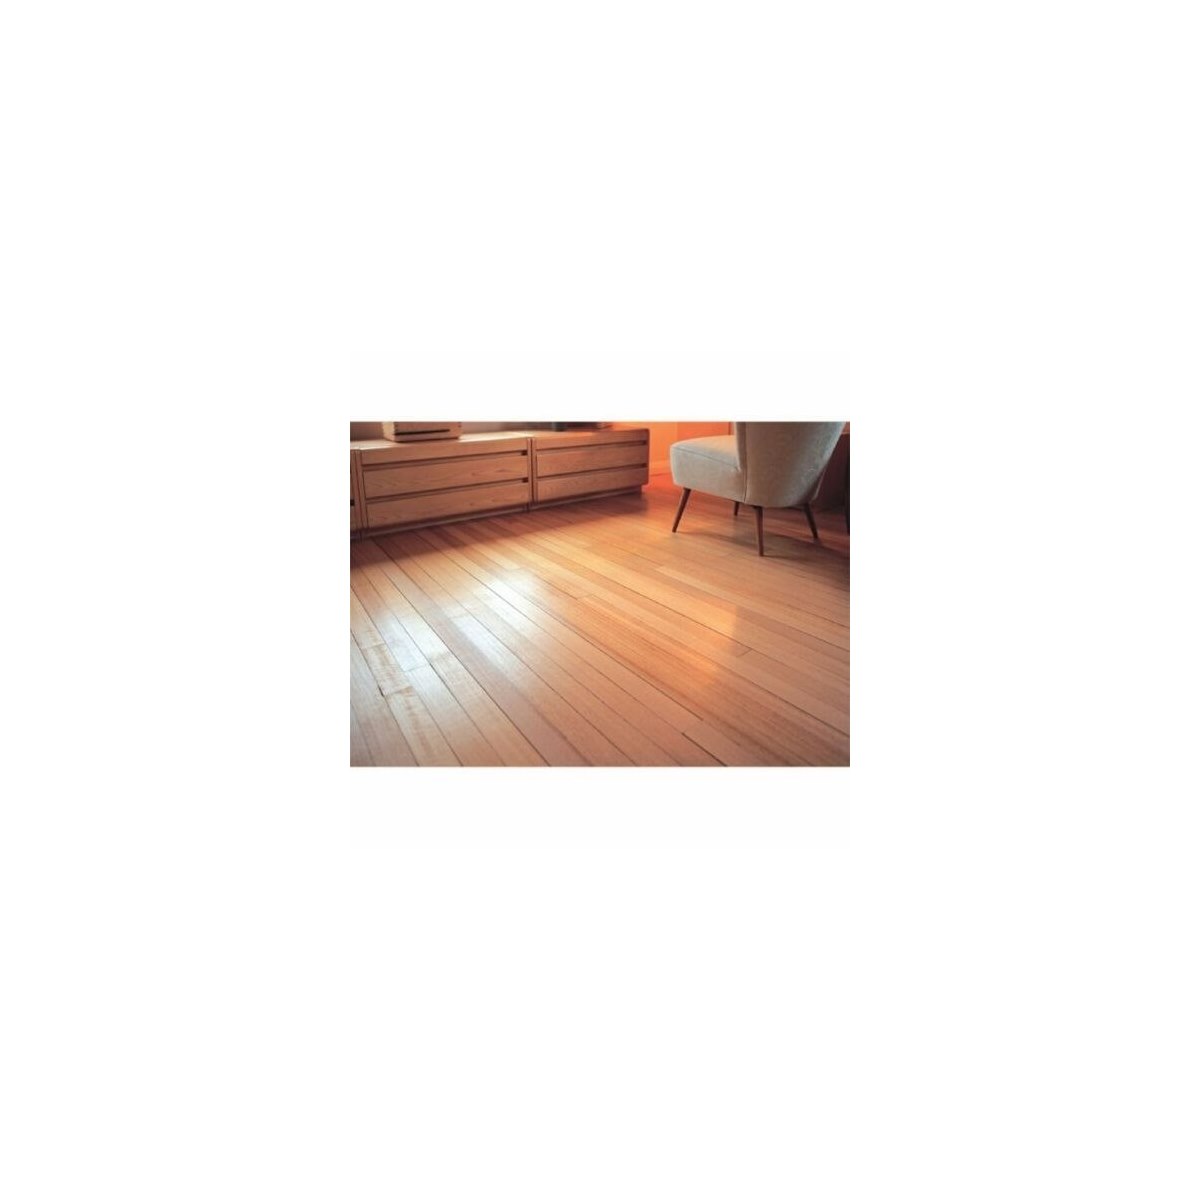 Where to buy Varnish for Wood Floors